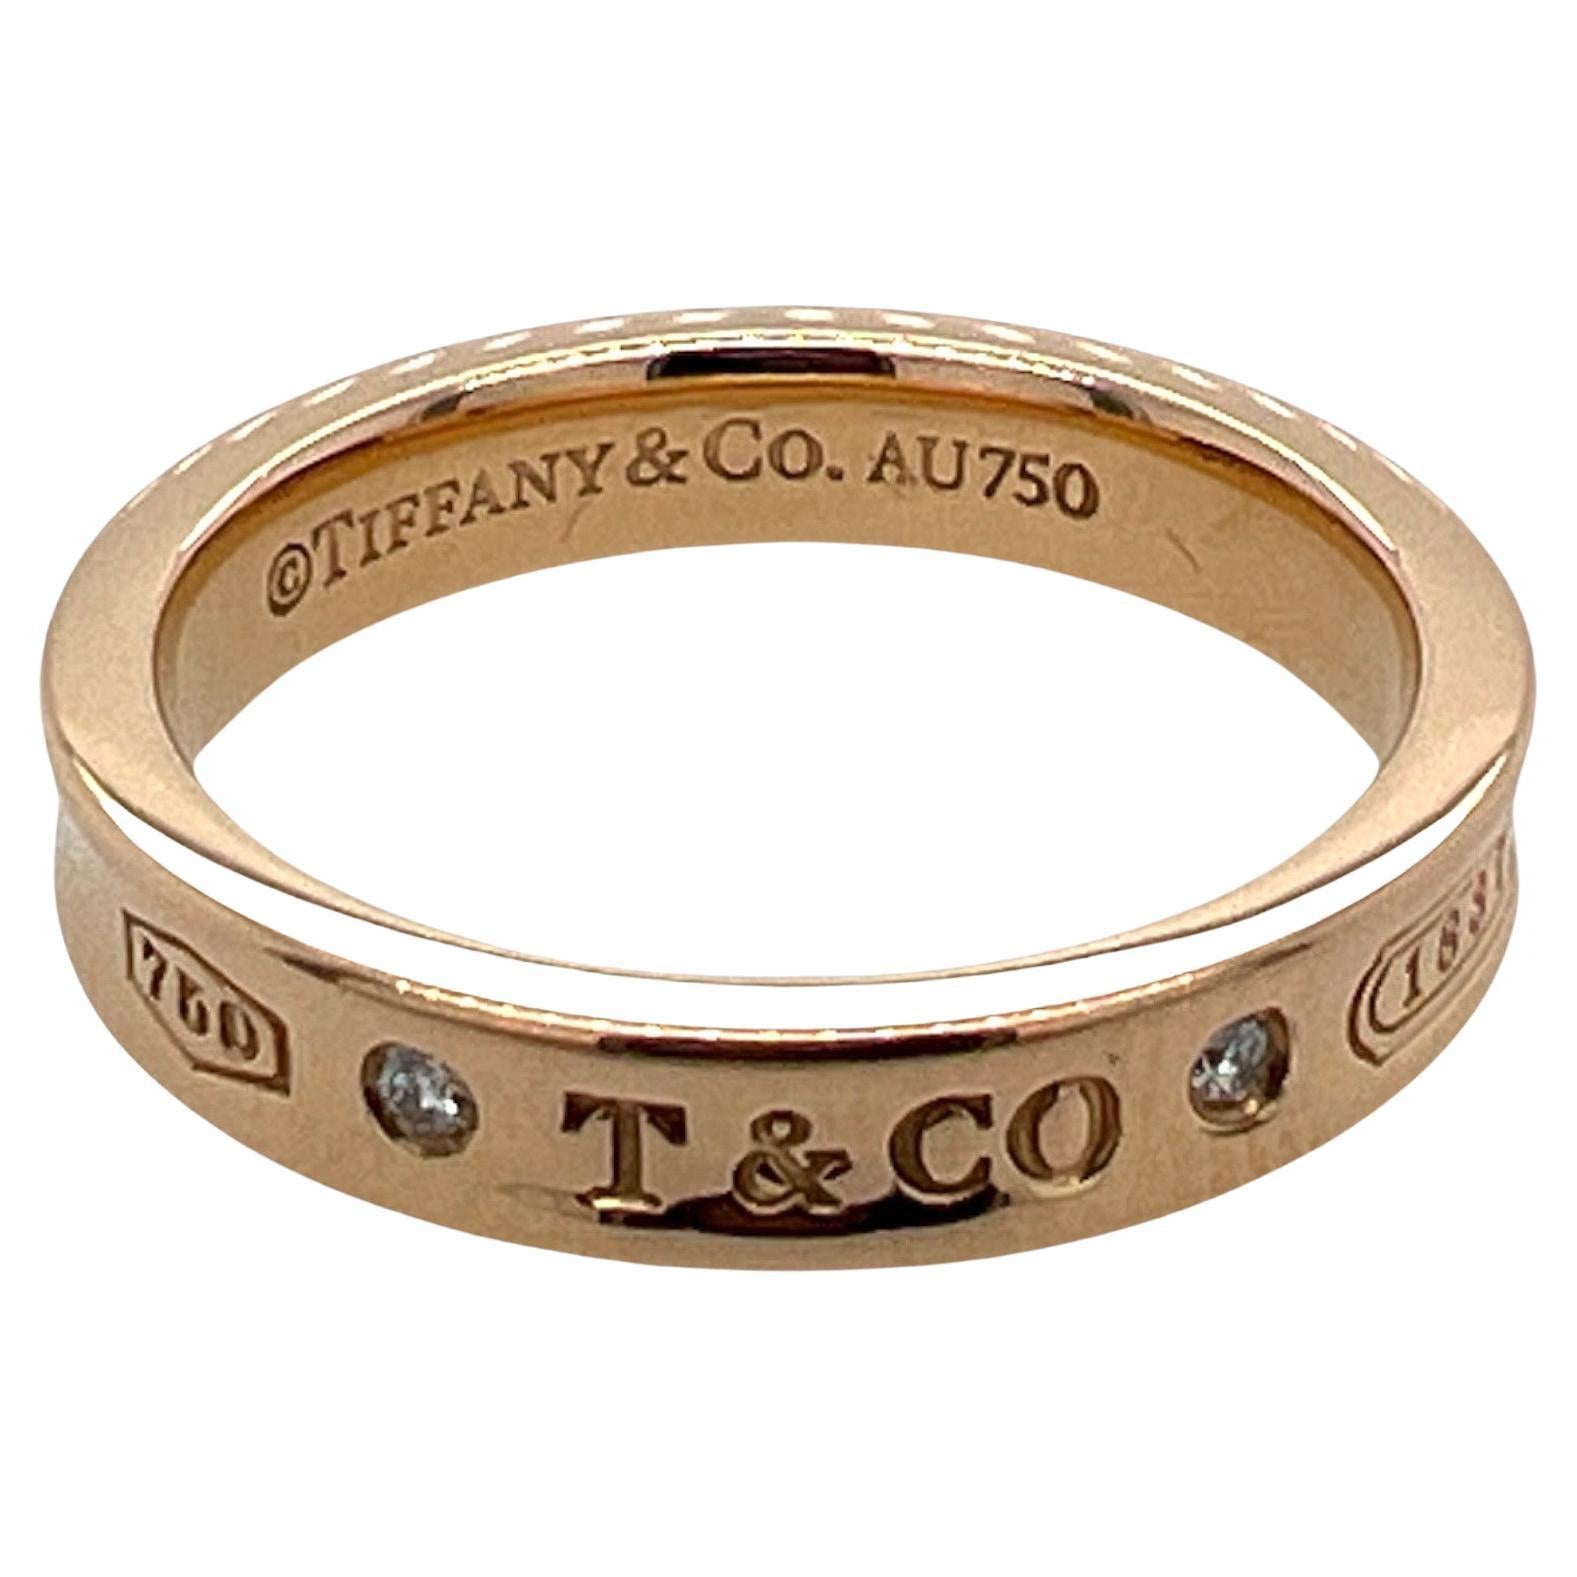 Tiffany & Co. Diamond 1837 band ring fashioned in 18 karat rose gold. The band features 2 round brilliant cut diamonds weighing .03 carat total weight. The band measures 1.5mm in width and is size 7. 